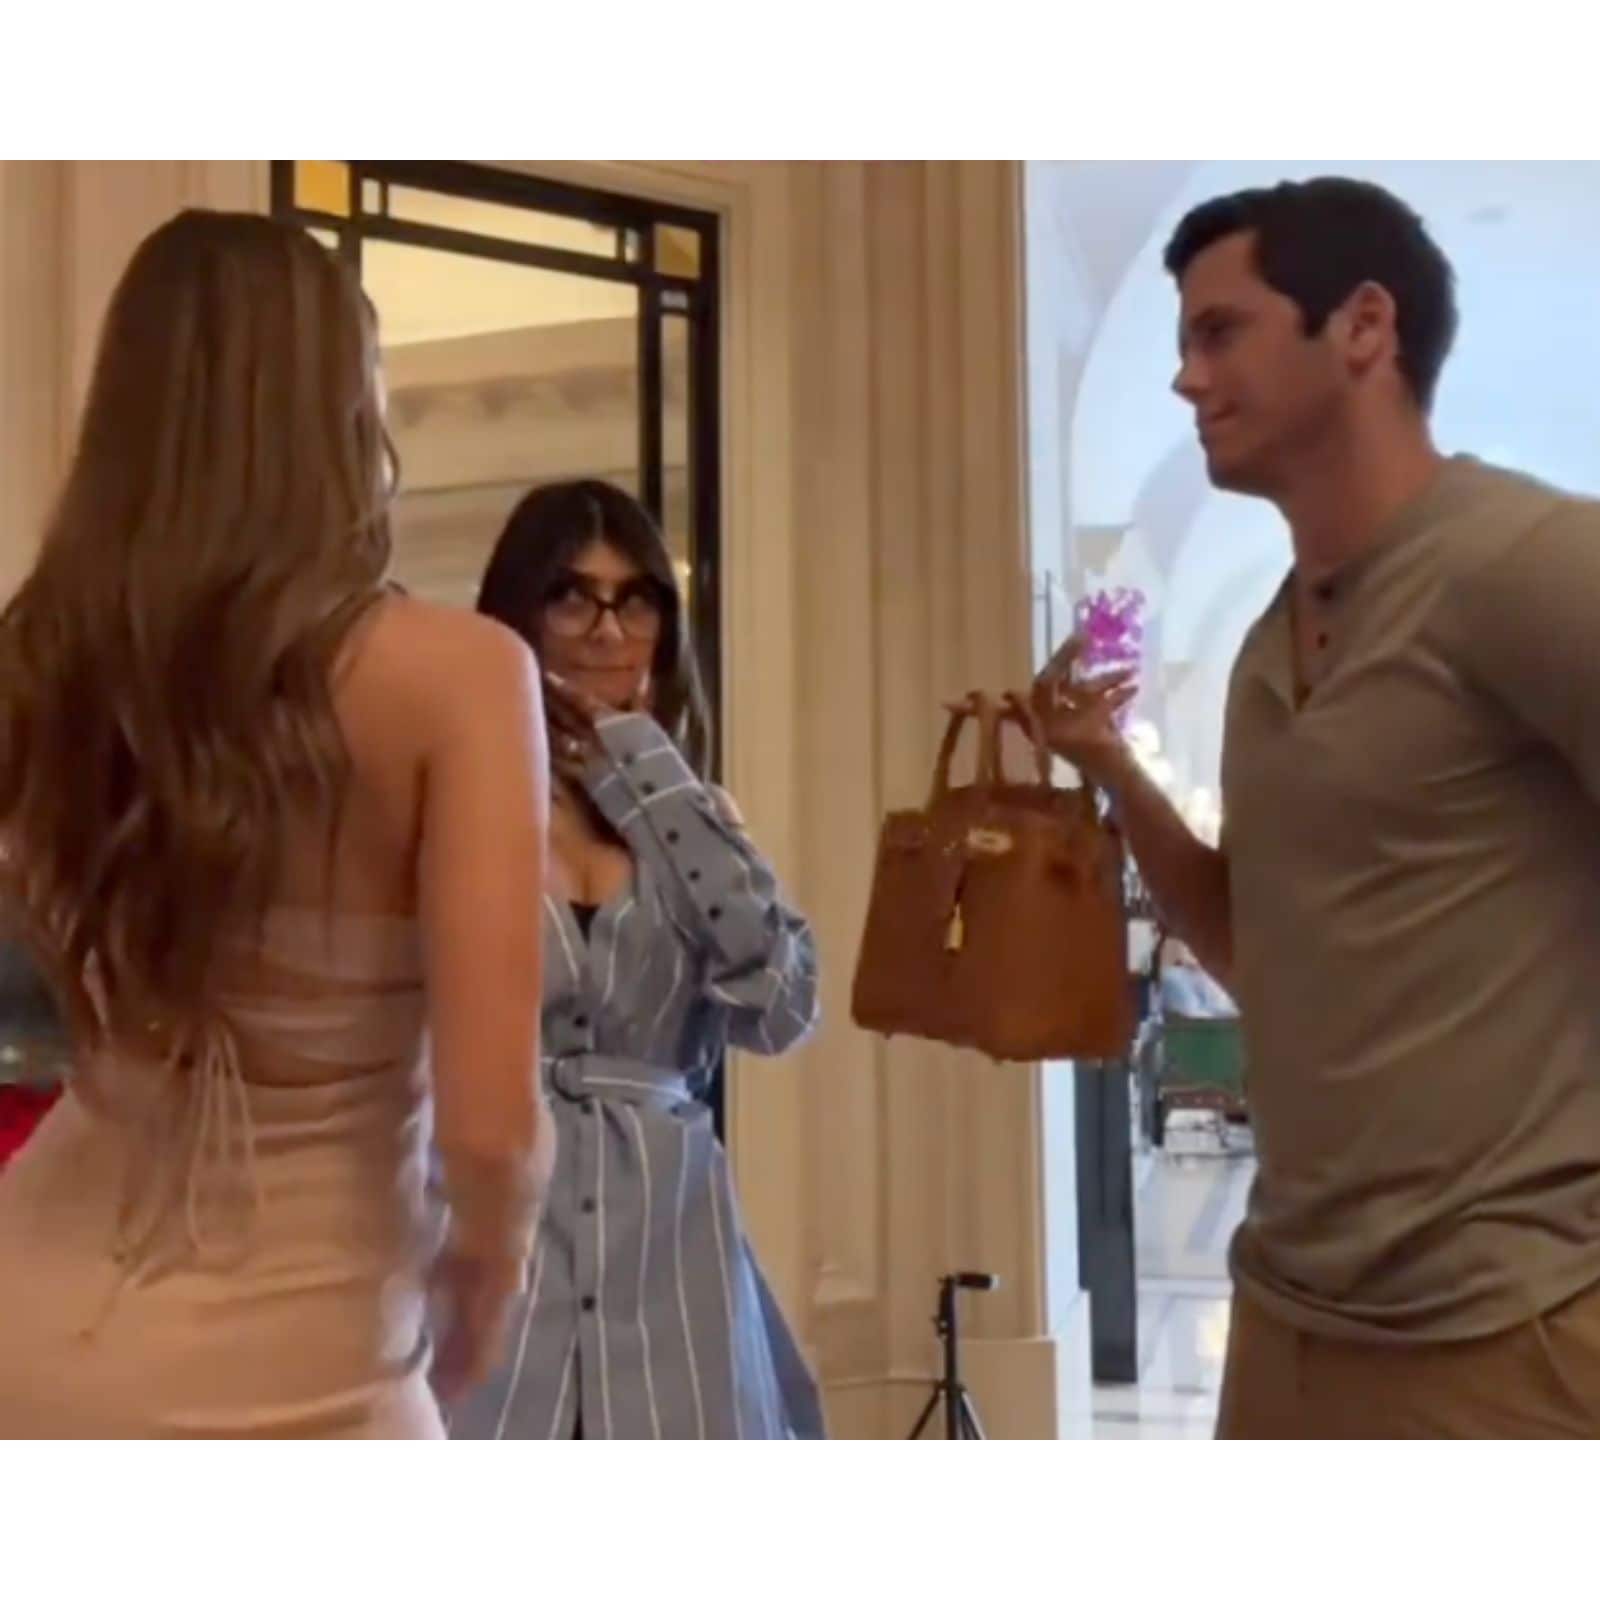 Man Buys Wife Birkin Bag to Say Sorry for Recognising Mia Khalifa While on  Honeymoon - News18